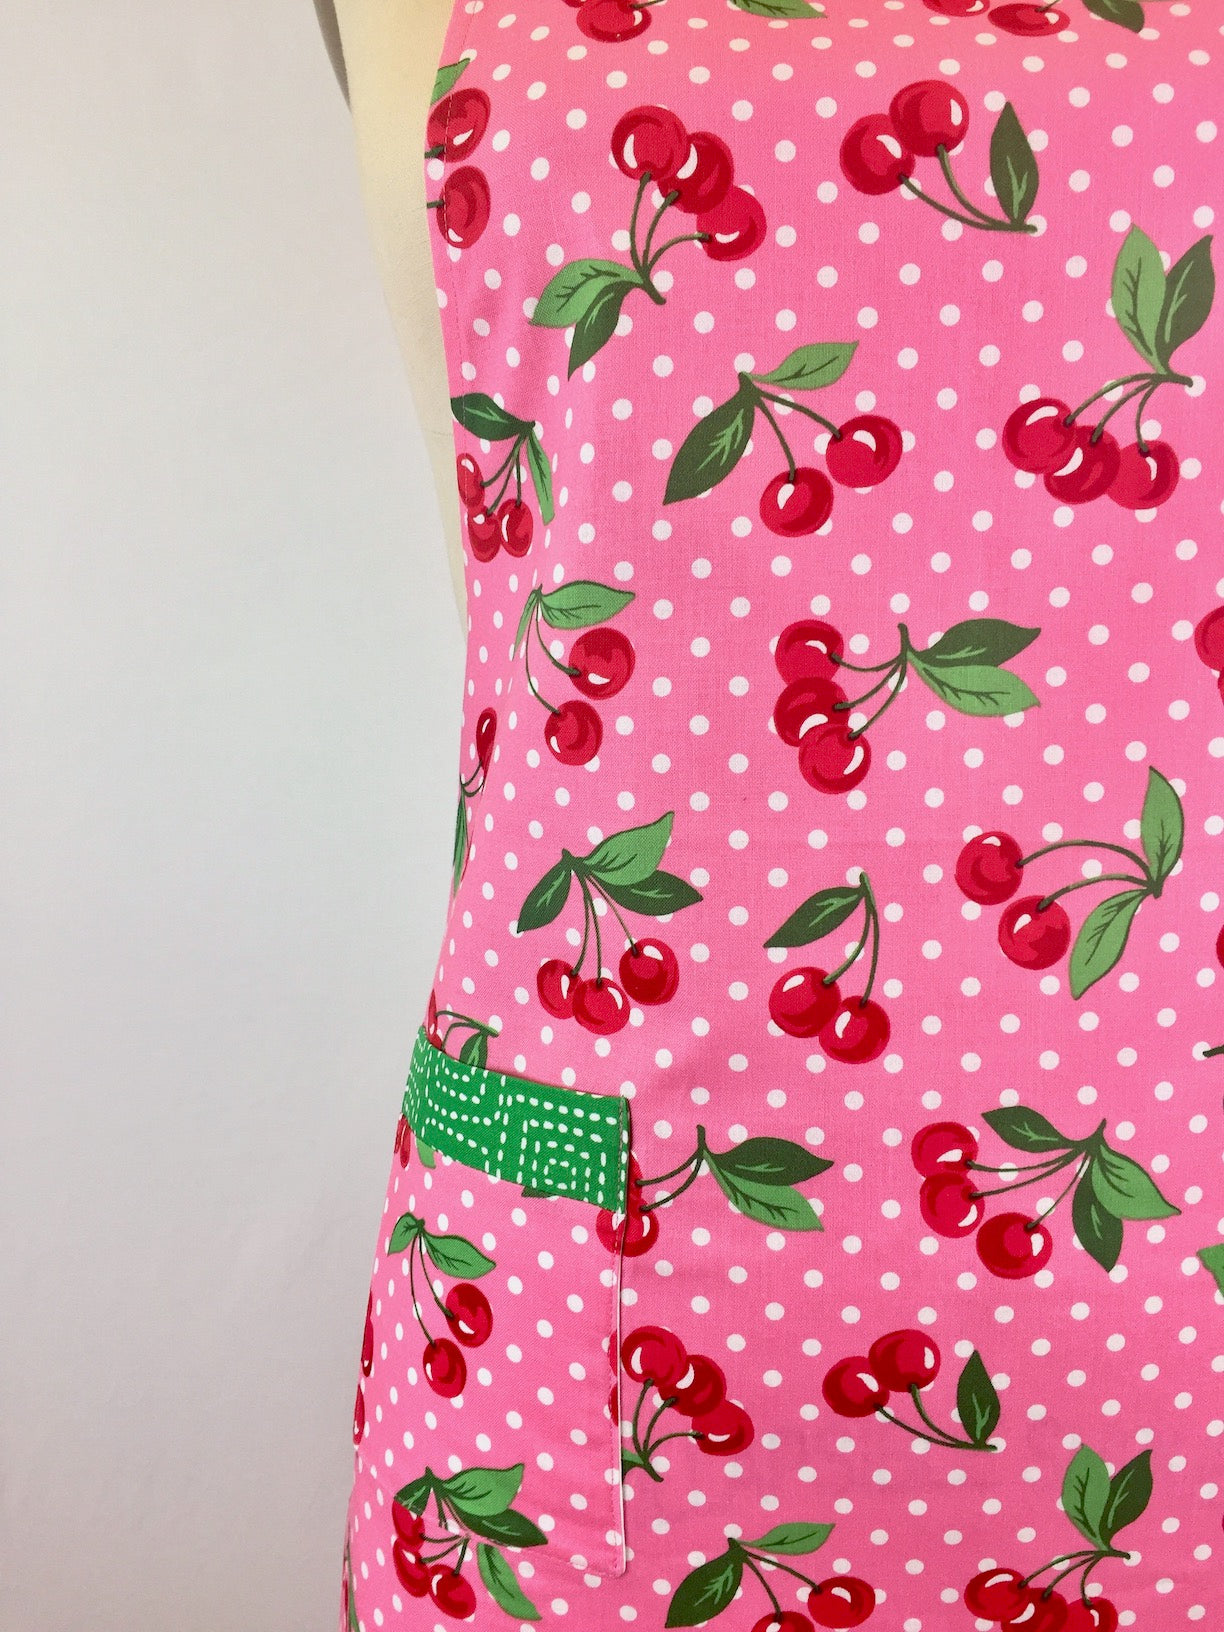 Cherry Dot Apron - Pink-The Blue Peony-Age Group_Adult,Apron Style_Chef,Category_Apron,Color_Pink,Department_Kitchen,Material_Cotton,Theme_Food,Theme_Spring